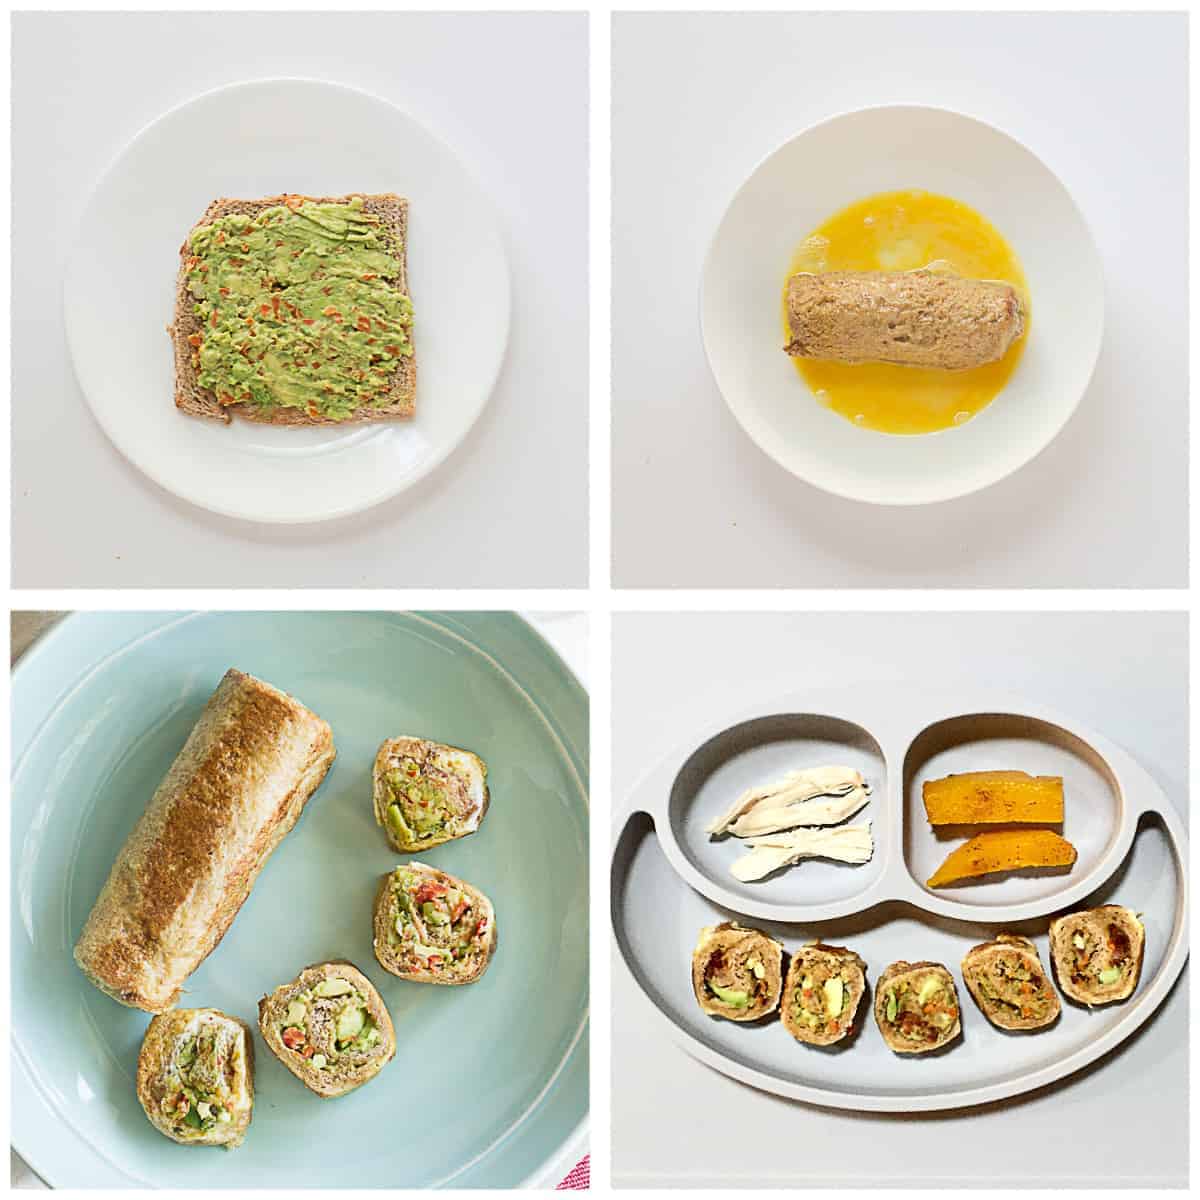 4 picture collage showing a slice of bread topped with avocado and veggies, rolled and dunked in egg, sliced , and served with chicken and butternut squash